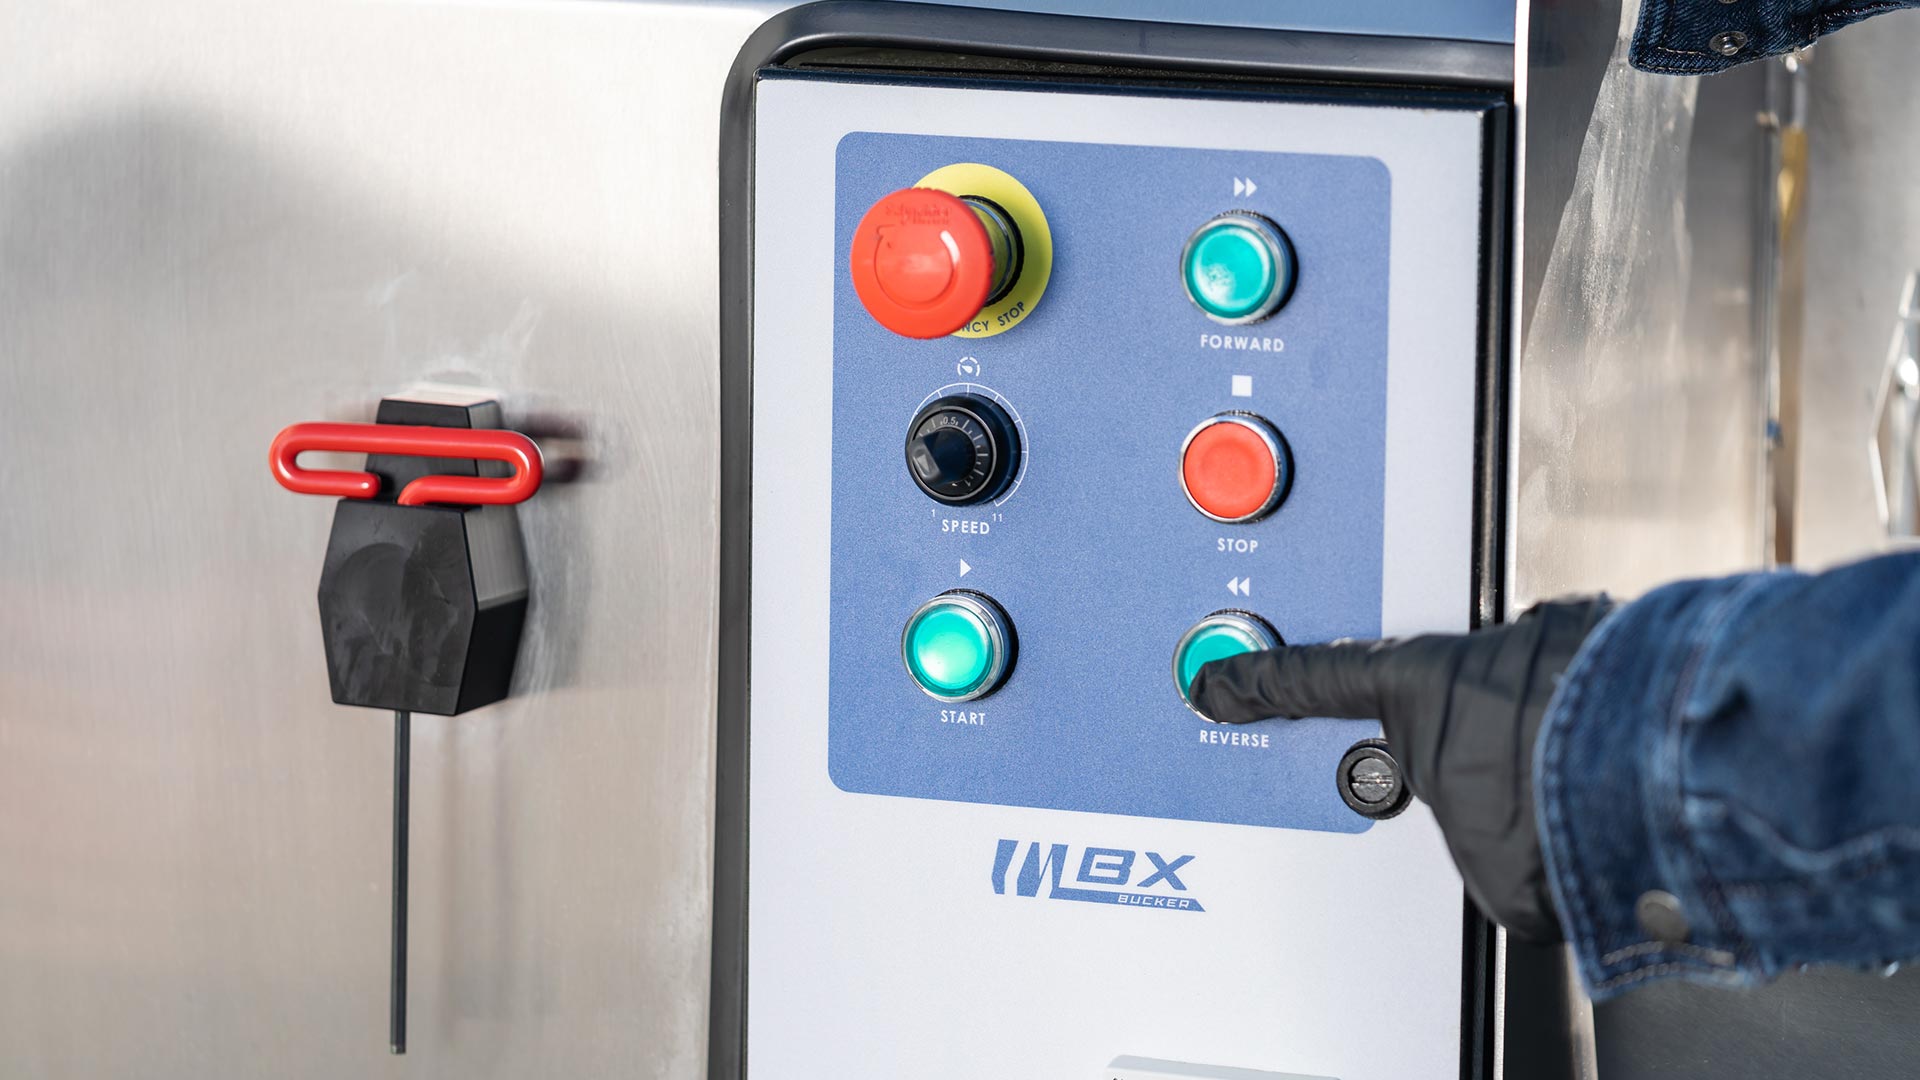 mbx-cleaning-reverse-button